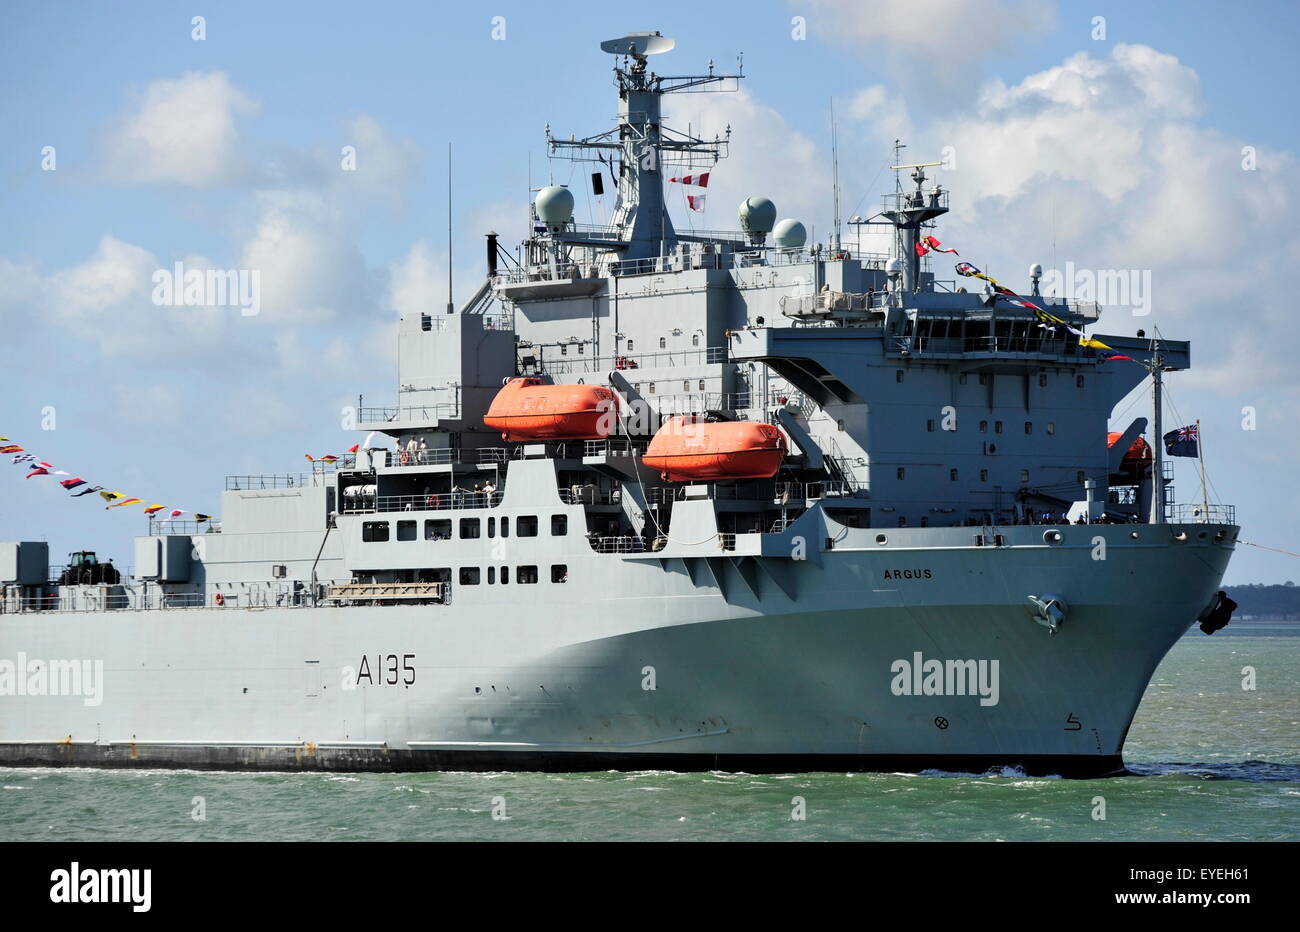 AJAXNETPHOTO. - 6TH JUNE, 2015. PORTSMOUTH, ENGLAND. - RFA SHIP ARRIVES - RFA ARGUS  PRIMARY CASUALTY RECEIVING SHIP (PCRS). PHOTO:TONY HOLLAND/AJAX REF:D150606 38397 Stock Photo